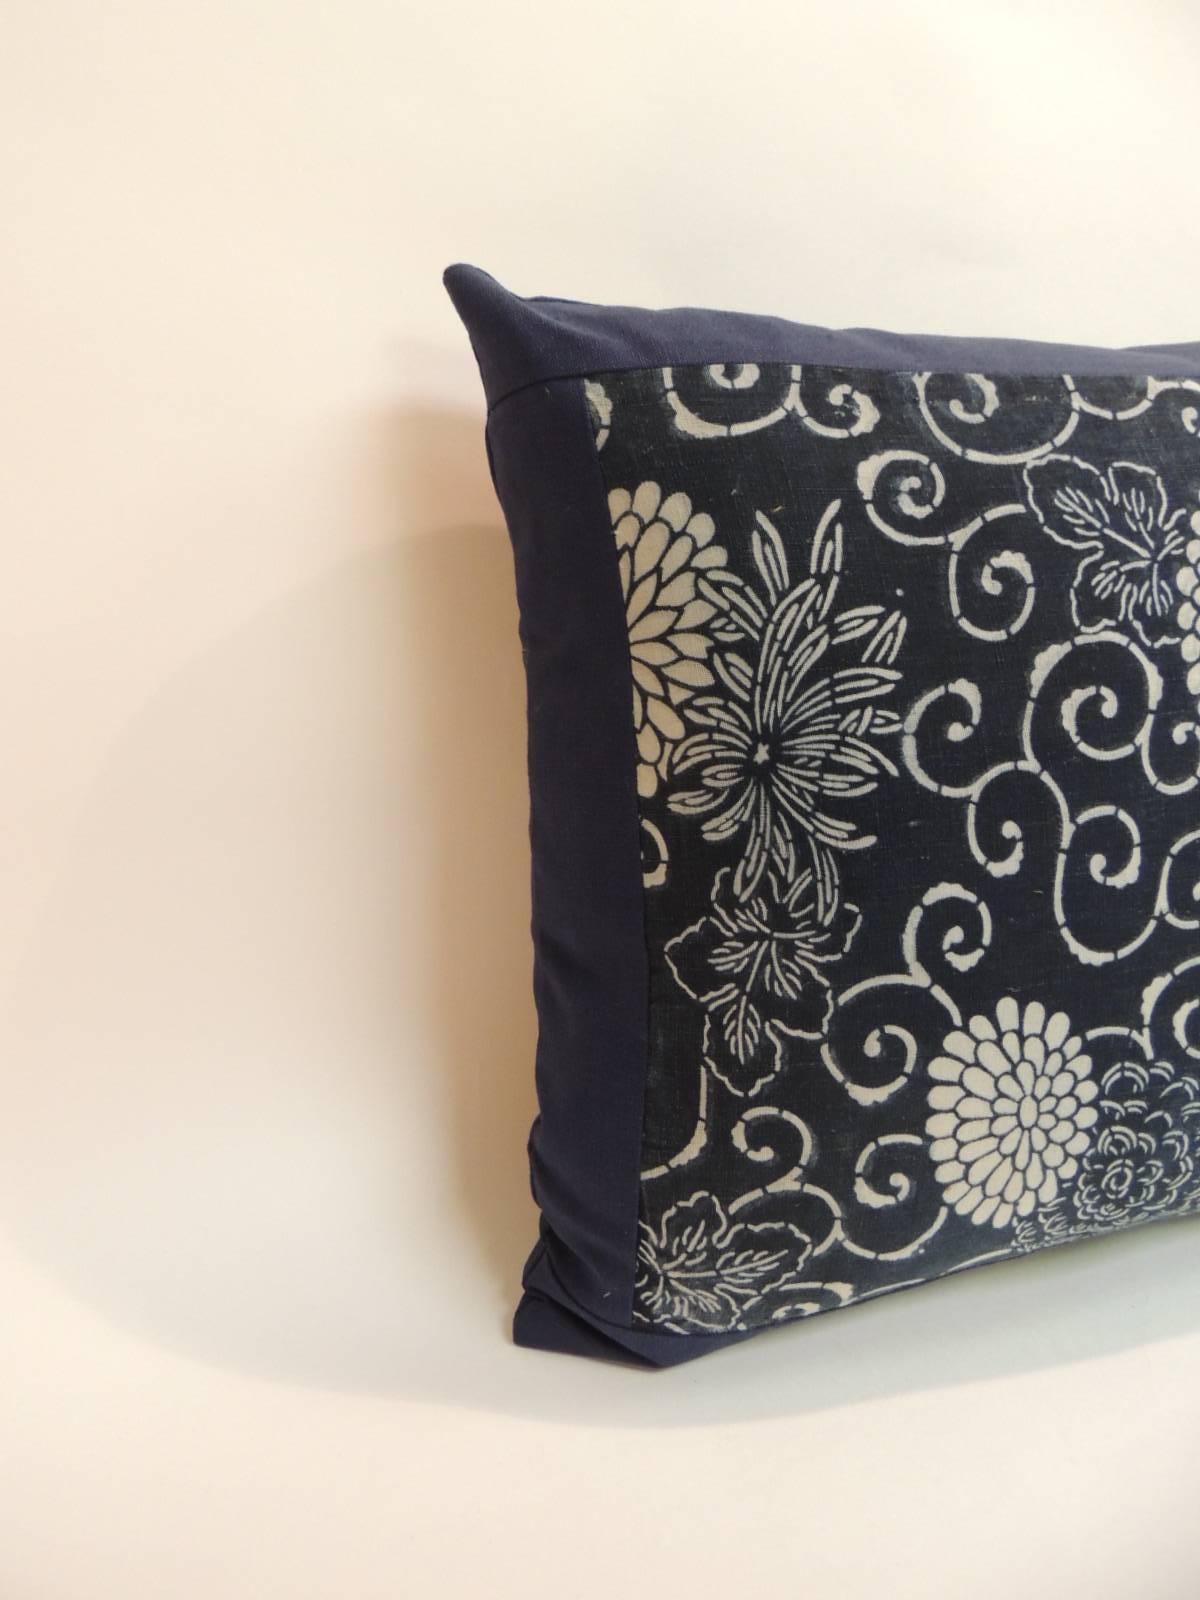 Japanese vintage hand-blocked Chrysanthemum accent bolster pillow with a hand-blocked floral motif. White on indigo vintage textile panel. Throw pillow design embellished with flowers in bloom and scrolling vines in the front textile panel and